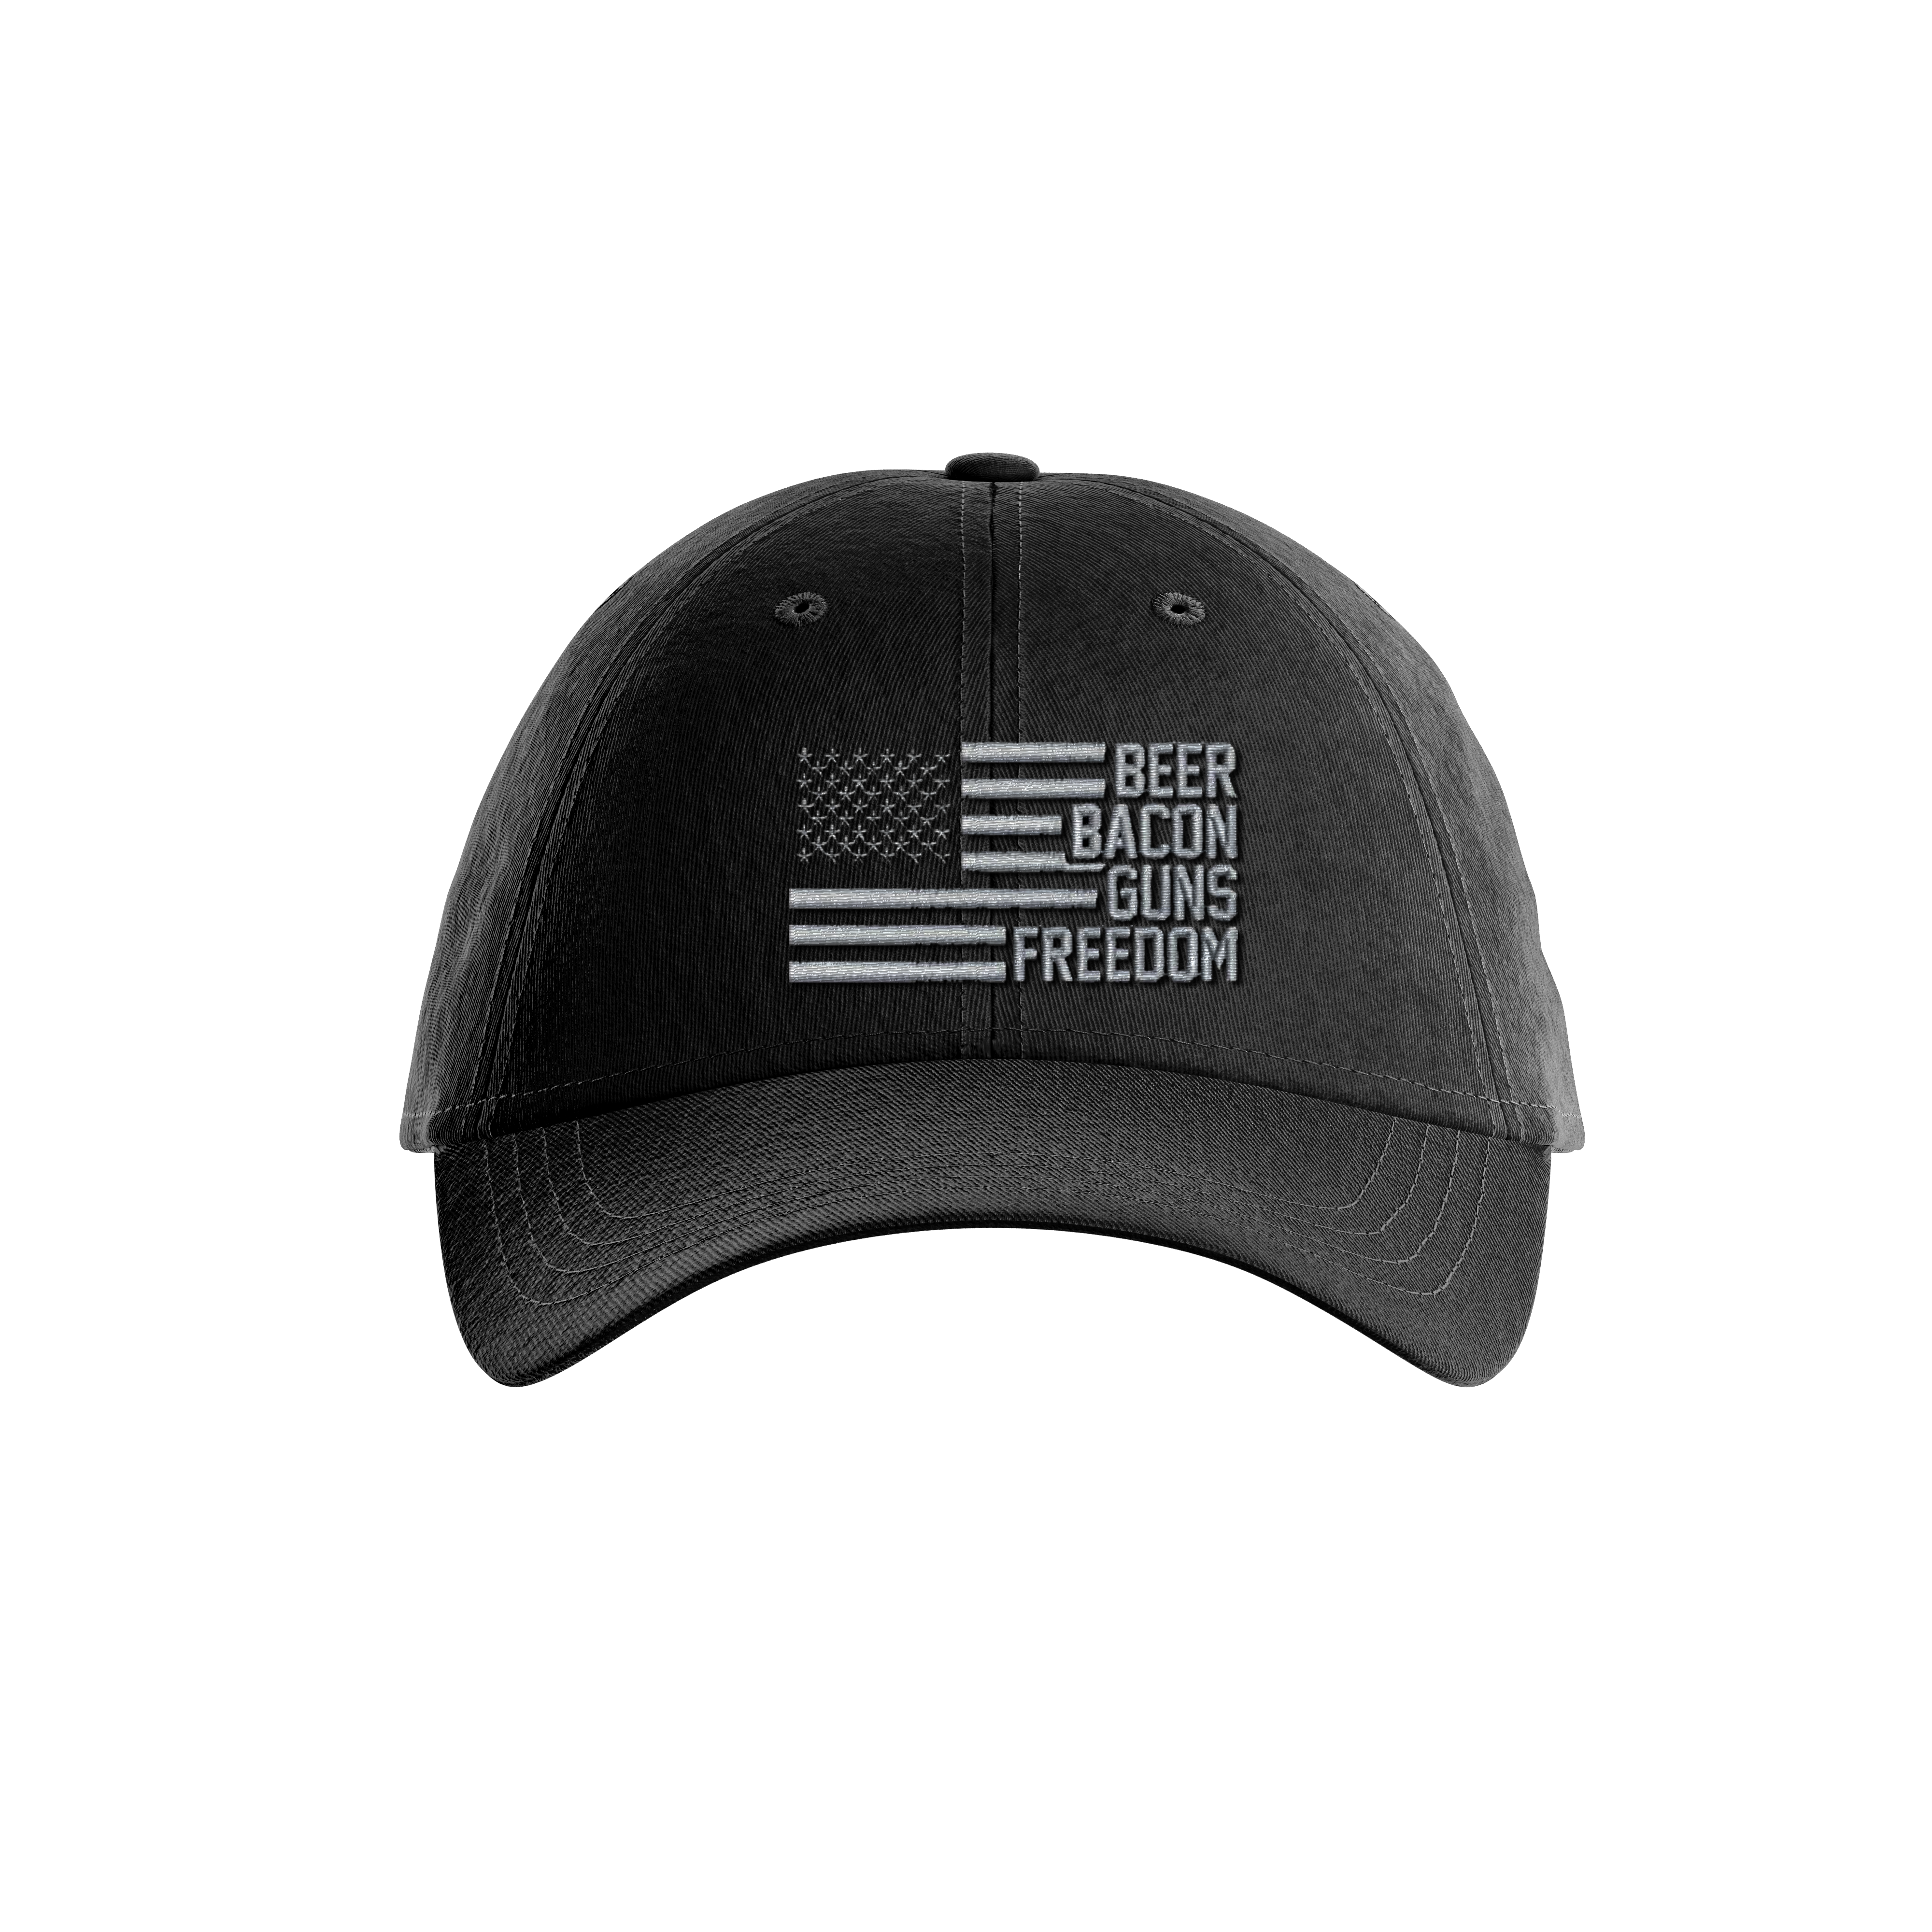 Beer Bacon Guns Freedom Dad Hat - Greater Half